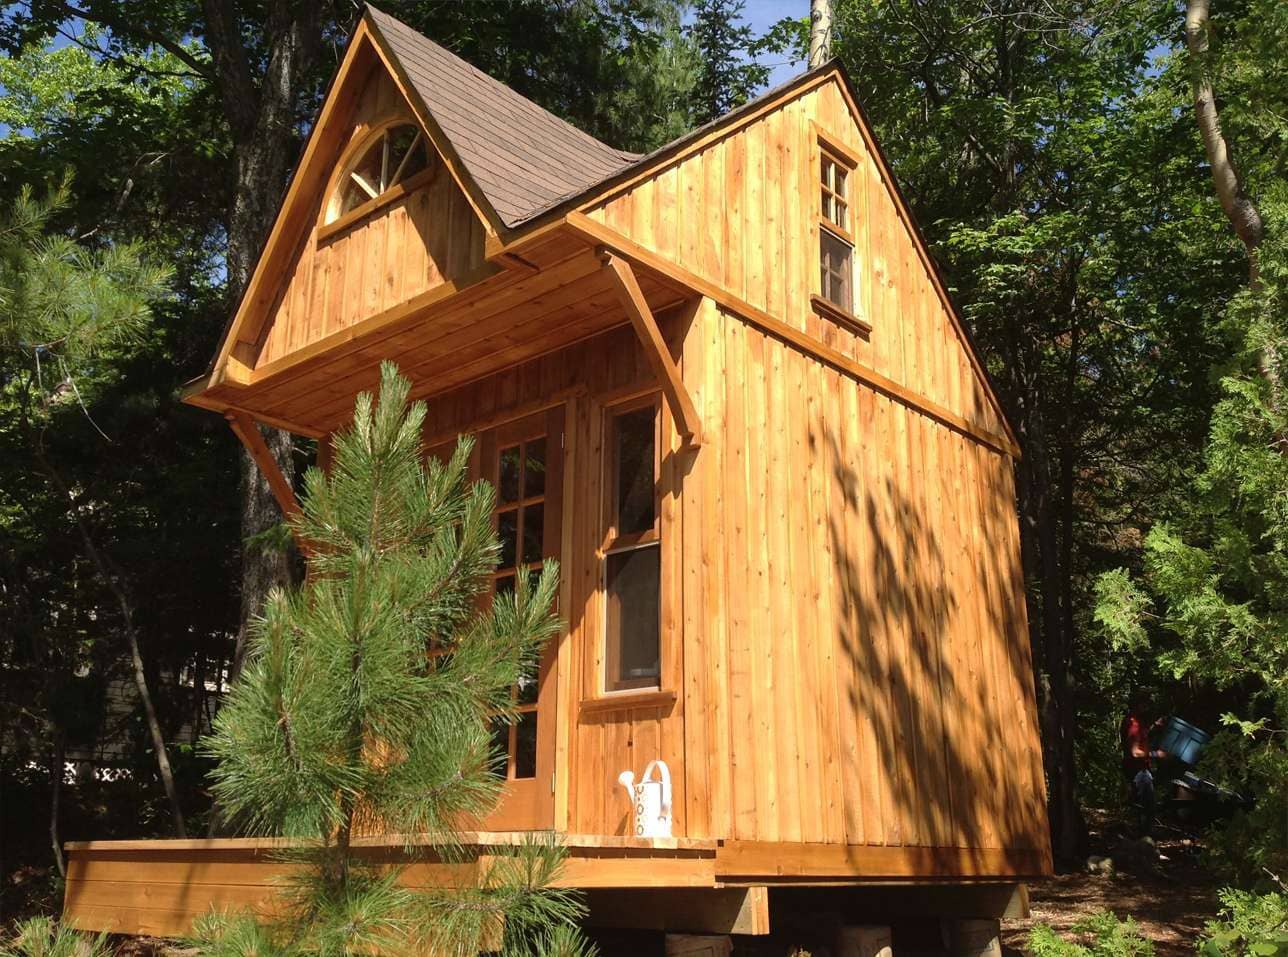 Prefab Bala bunkie kit 10 x 10 with pine loft in Temagami Ontario. ID Number 199643-1